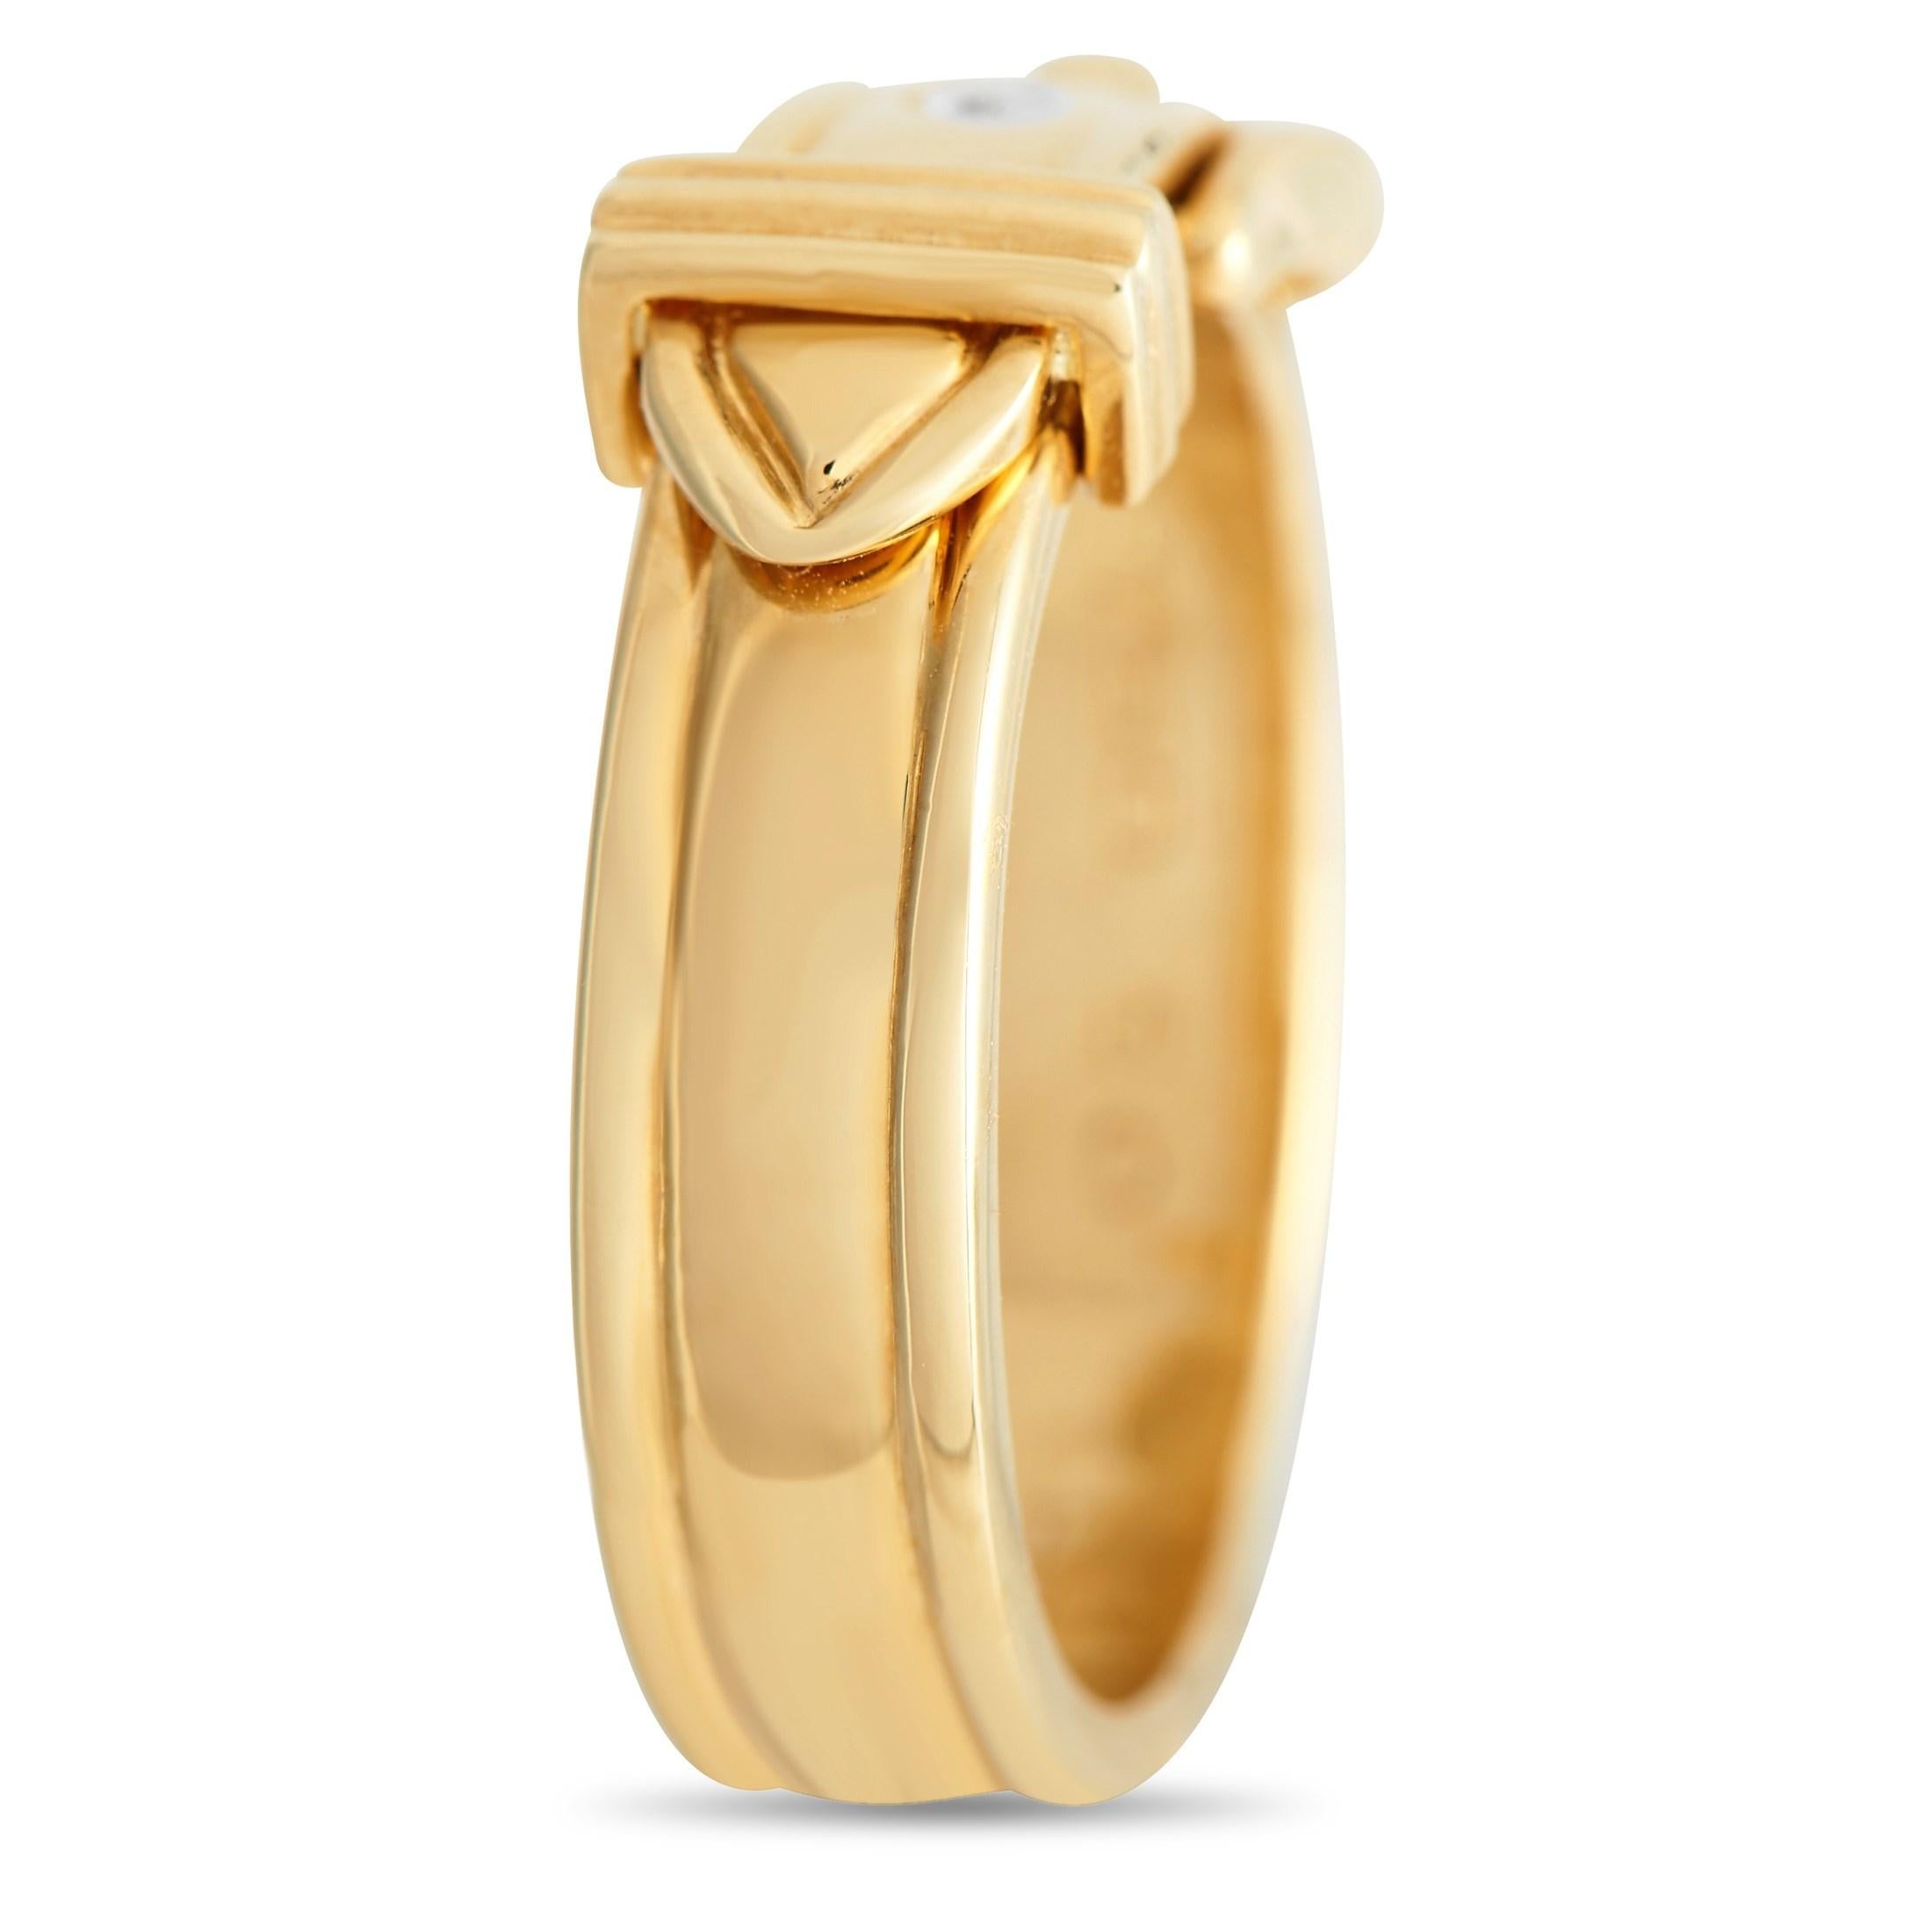 From the House of Hermès is this chic gold ring with a belt and buckle motif. The band measures 5mm with 7x15mm top dimensions. It weighs 6.5 grams and is fashioned from solid 18K yellow gold. Round out your outfits with a hint of radical luxury